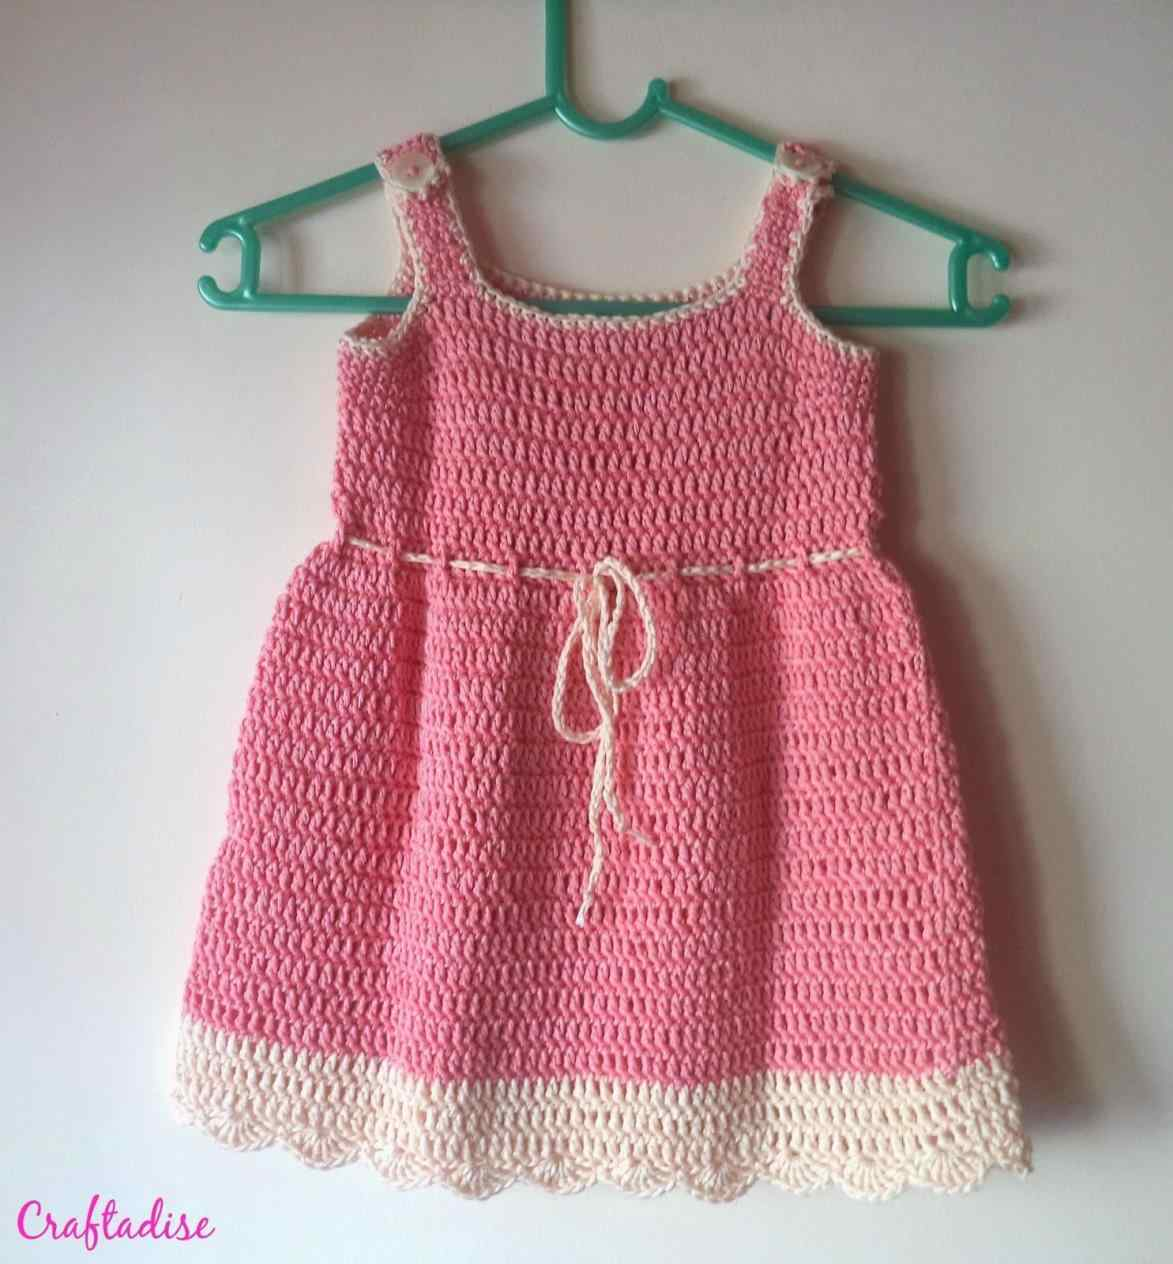 Crochet Toddler Dress Pattern Dress Patterns To An Easy Party Any Size Youtuberhyoutubecom Very